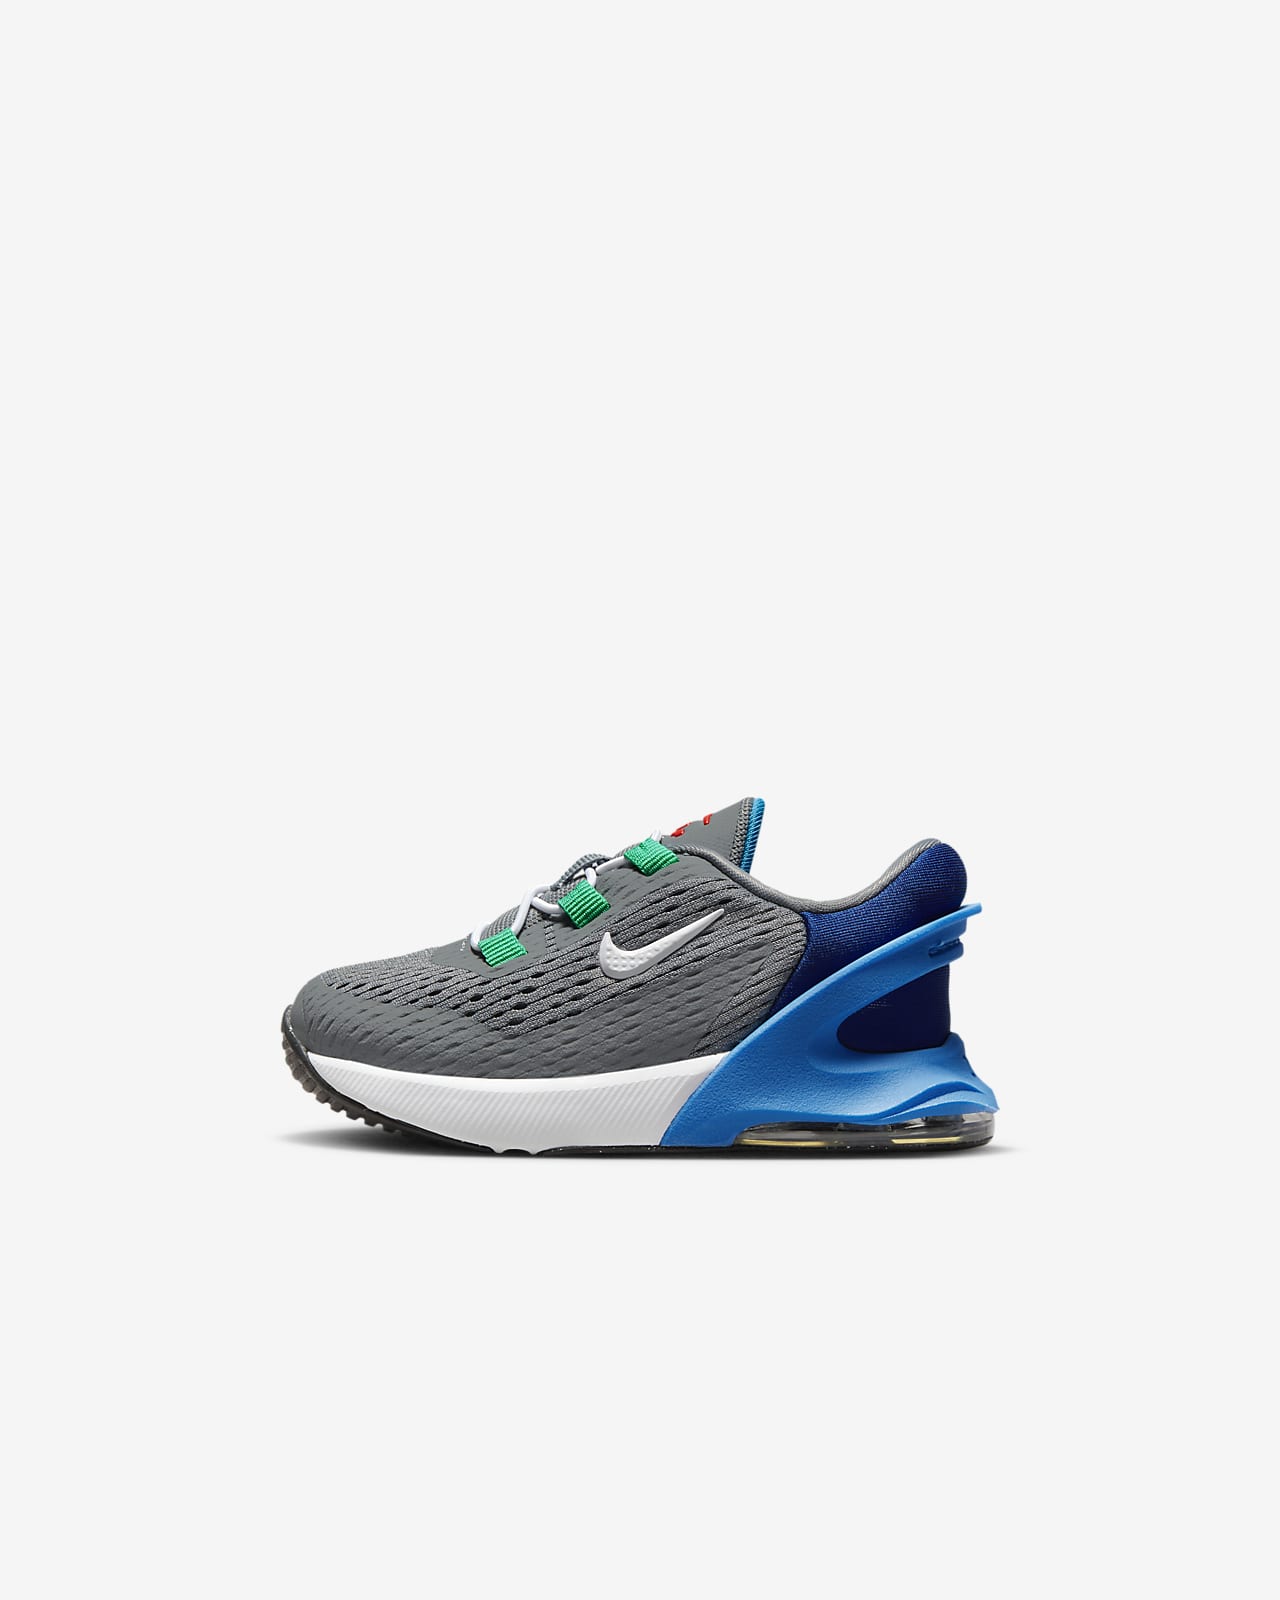 Air Max 270 GO Easy On/Off Shoes. LU